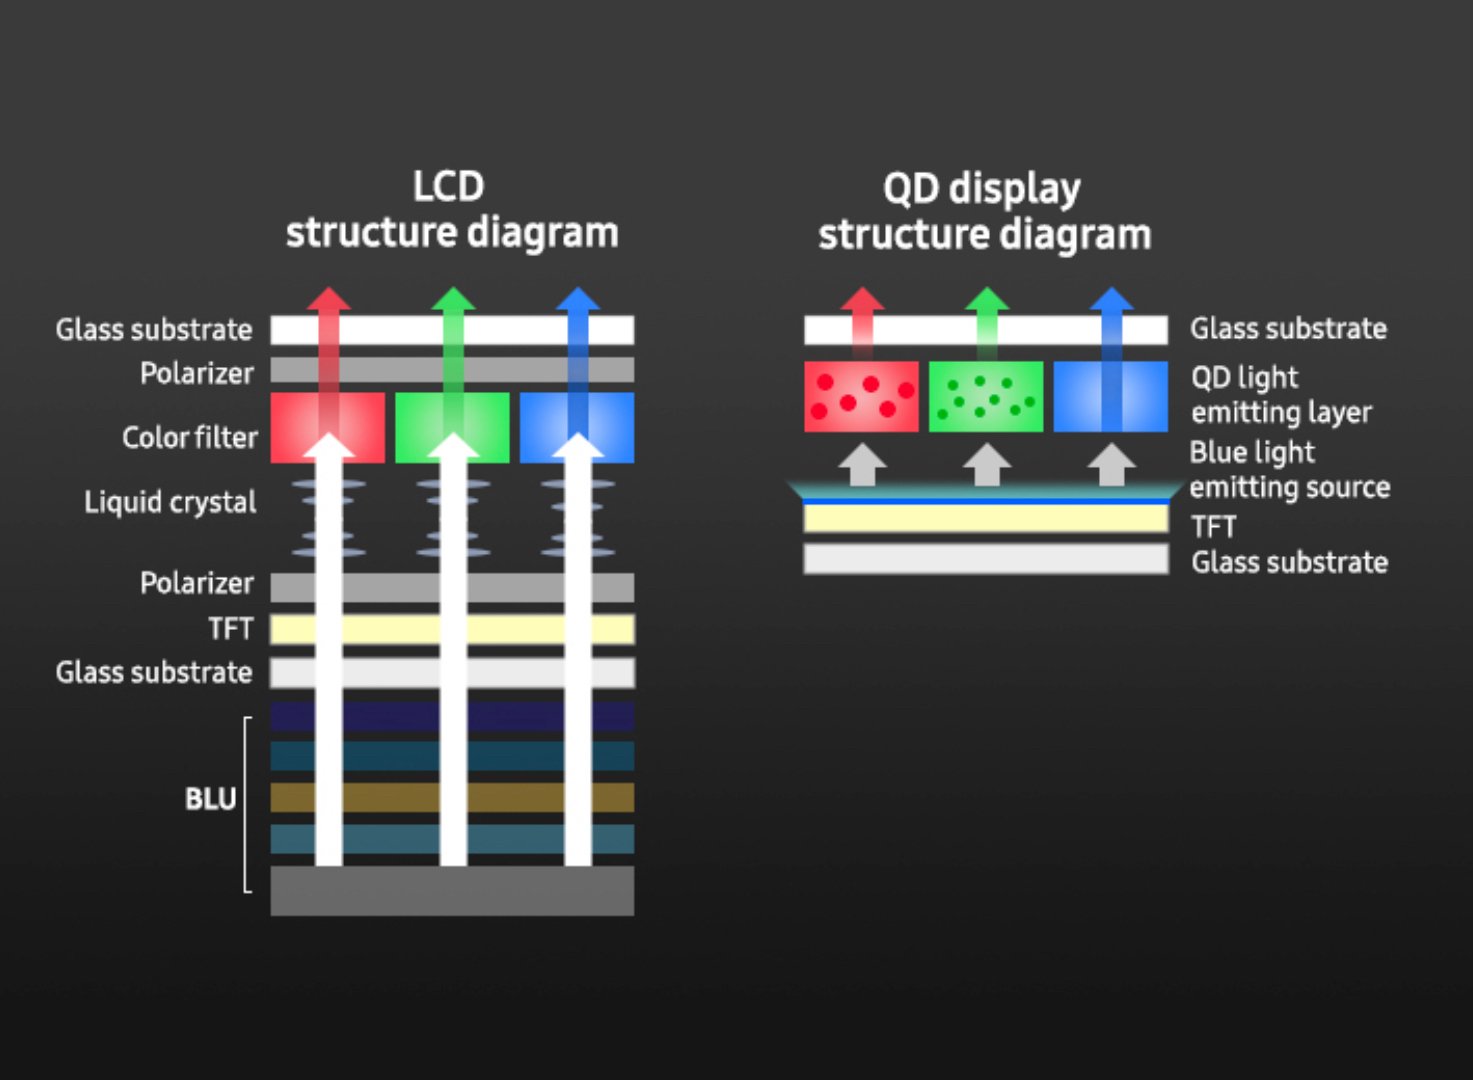 LED vs. OLED vs. QLED TVs – What's the Difference?